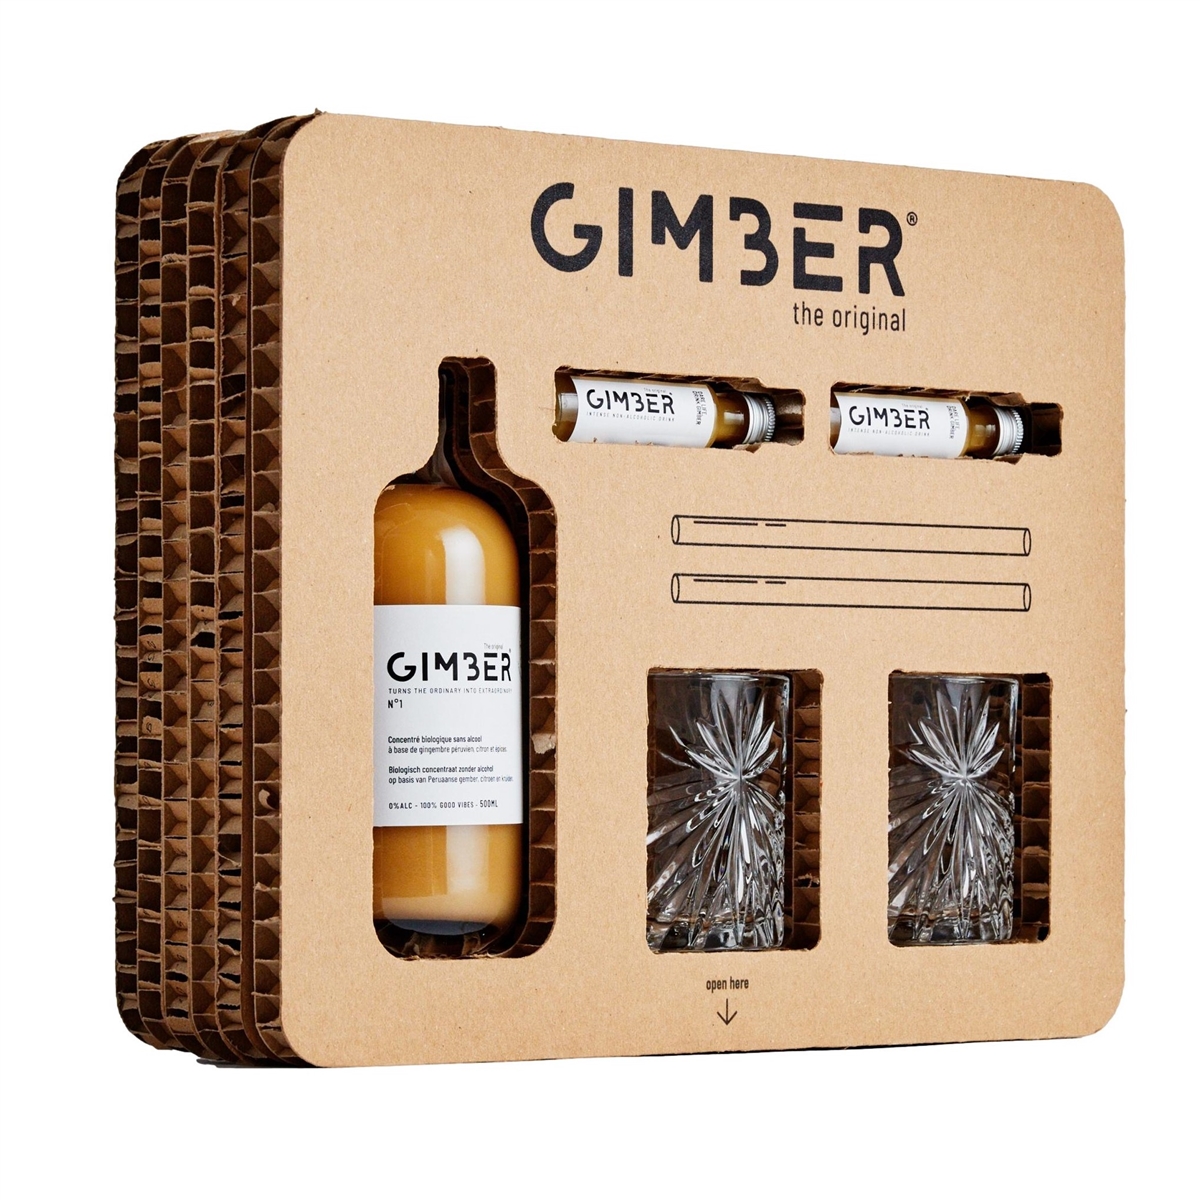 photo Gimber N°1 Original - Alcohol-free drink with Ginger, Lemon and Herbs - Gift Box